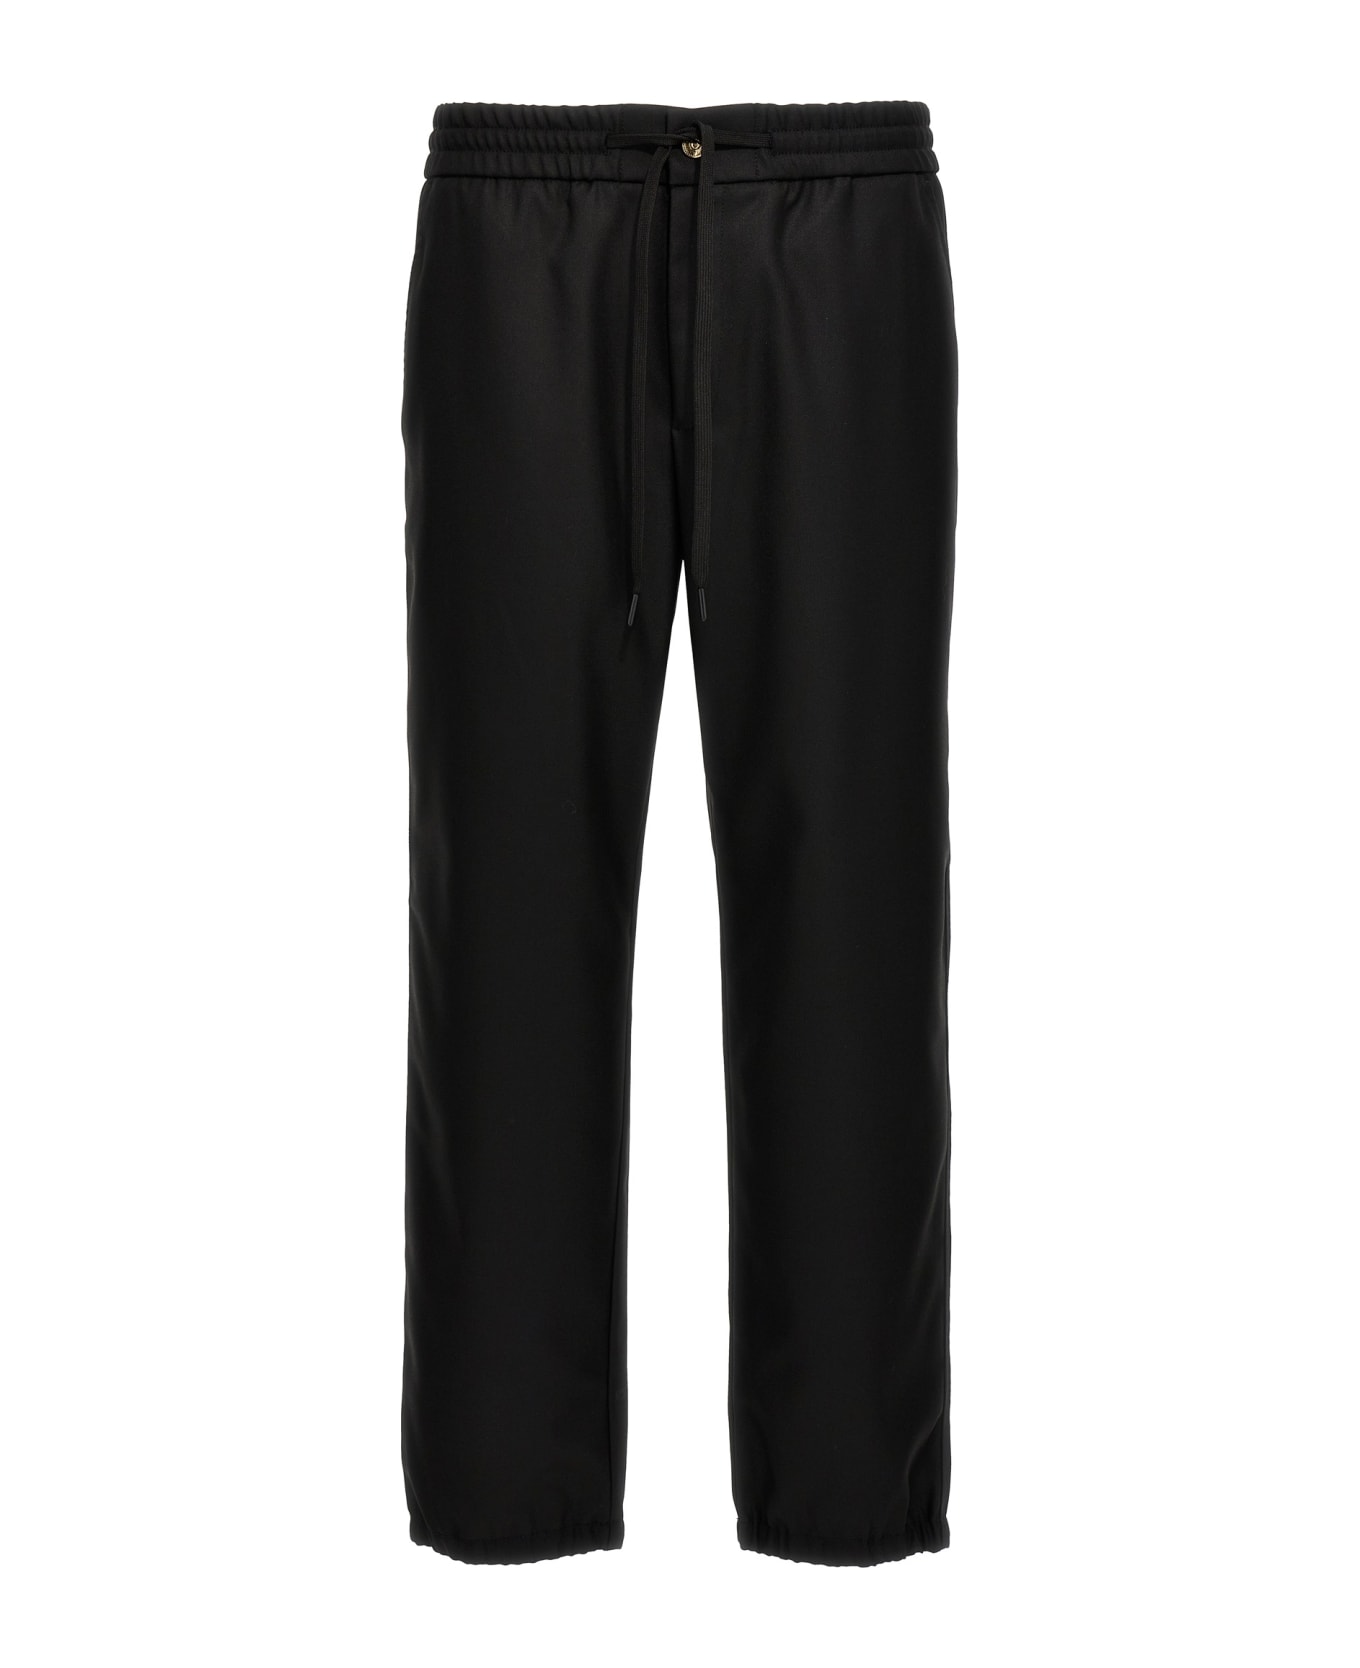 Versace Jeans Couture Tailoring Jogger Pants - Black ボトムス